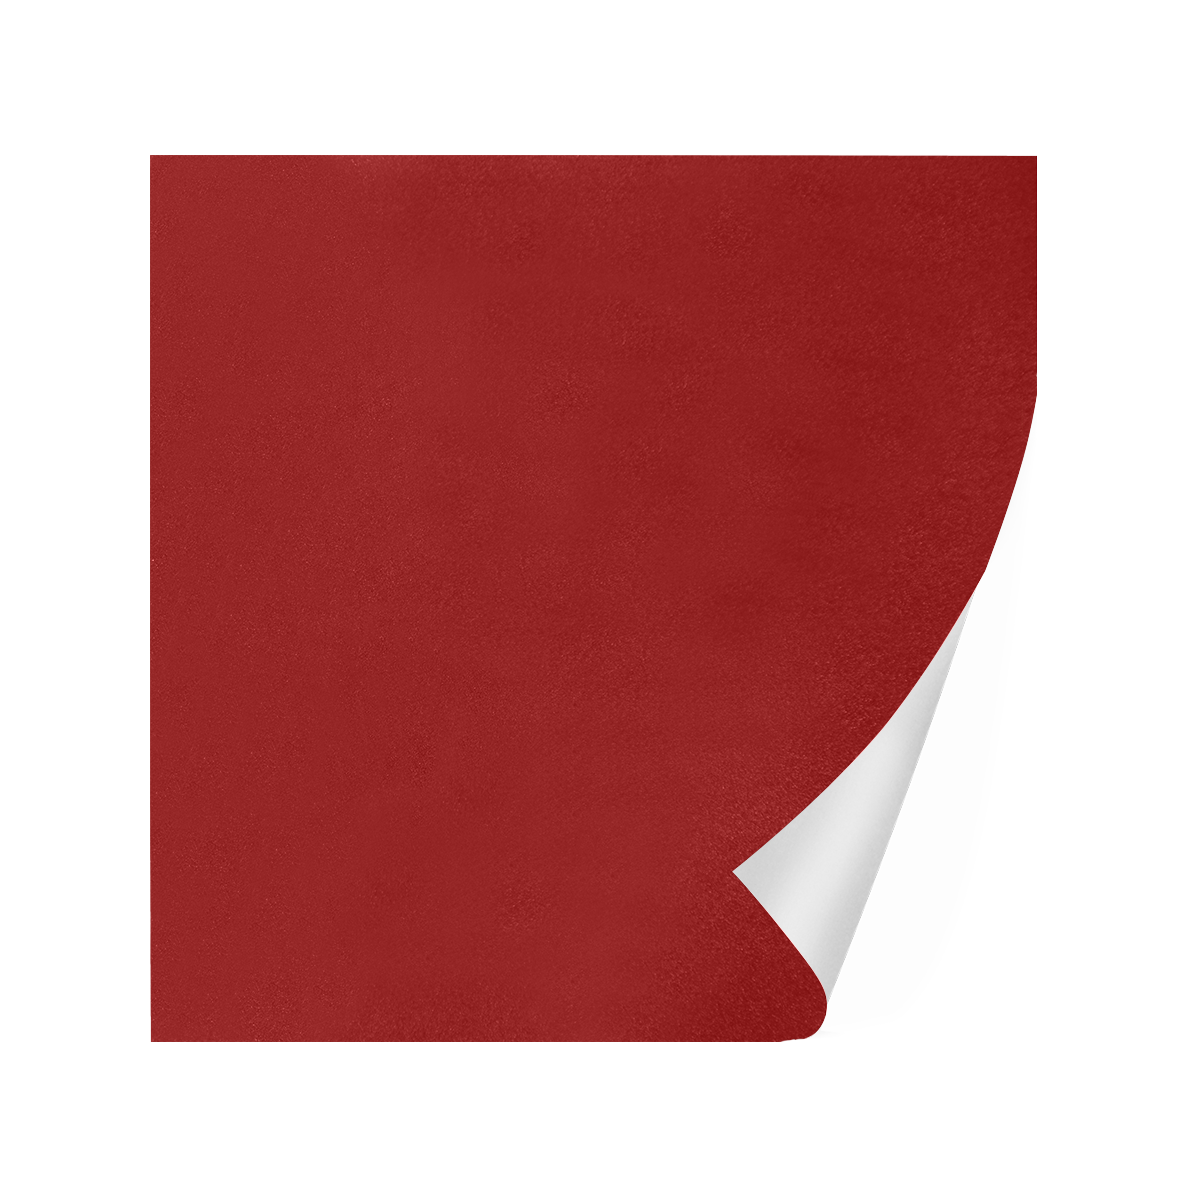 color dark red Gift Wrapping Paper 58"x 23" (1 Roll)